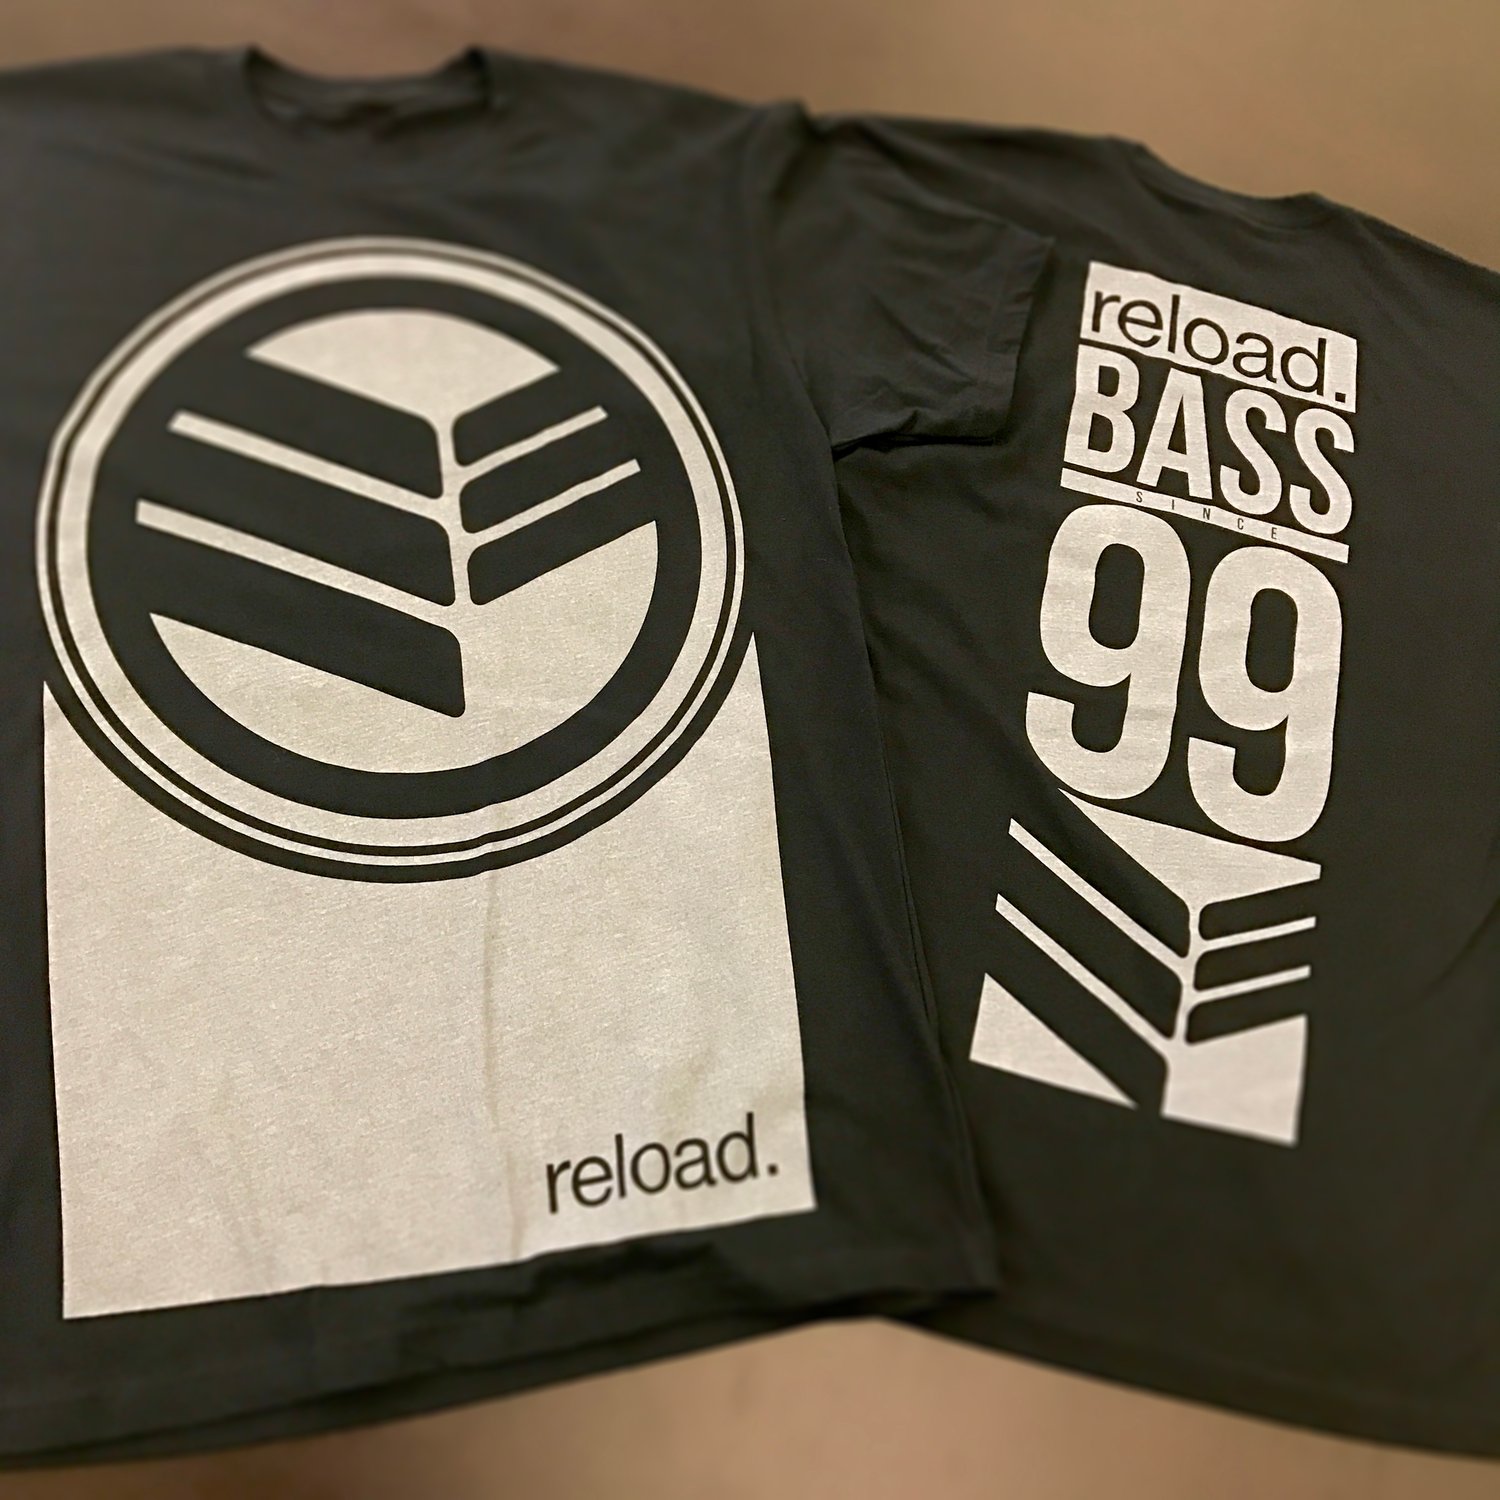 Image of Reload Since 99 tee